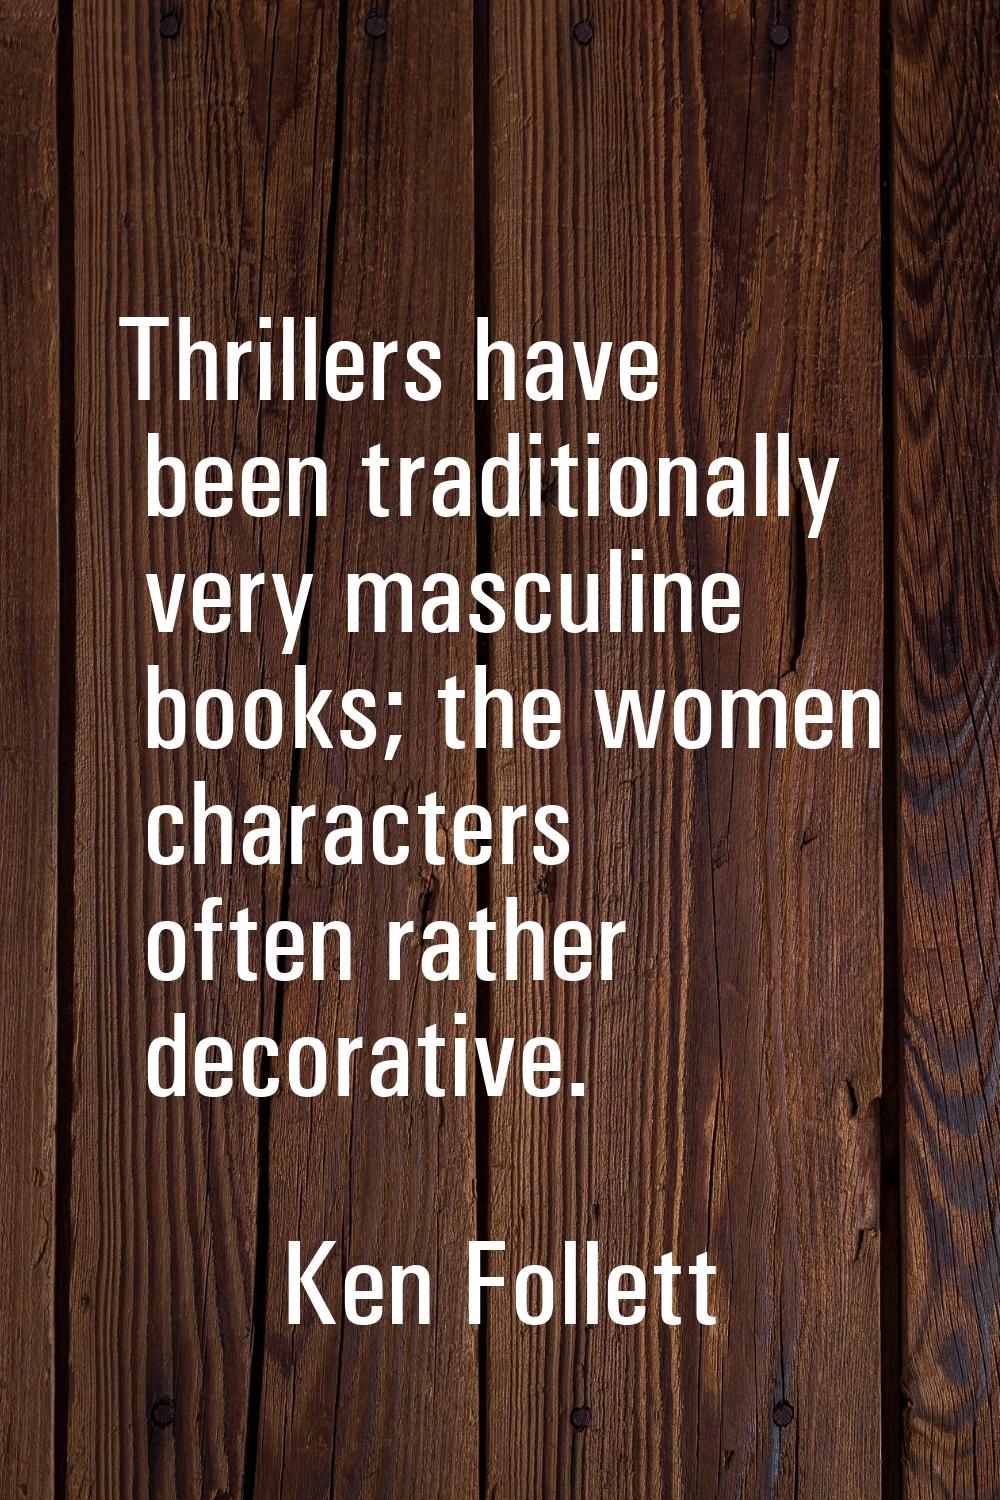 Thrillers have been traditionally very masculine books; the women characters often rather decorativ